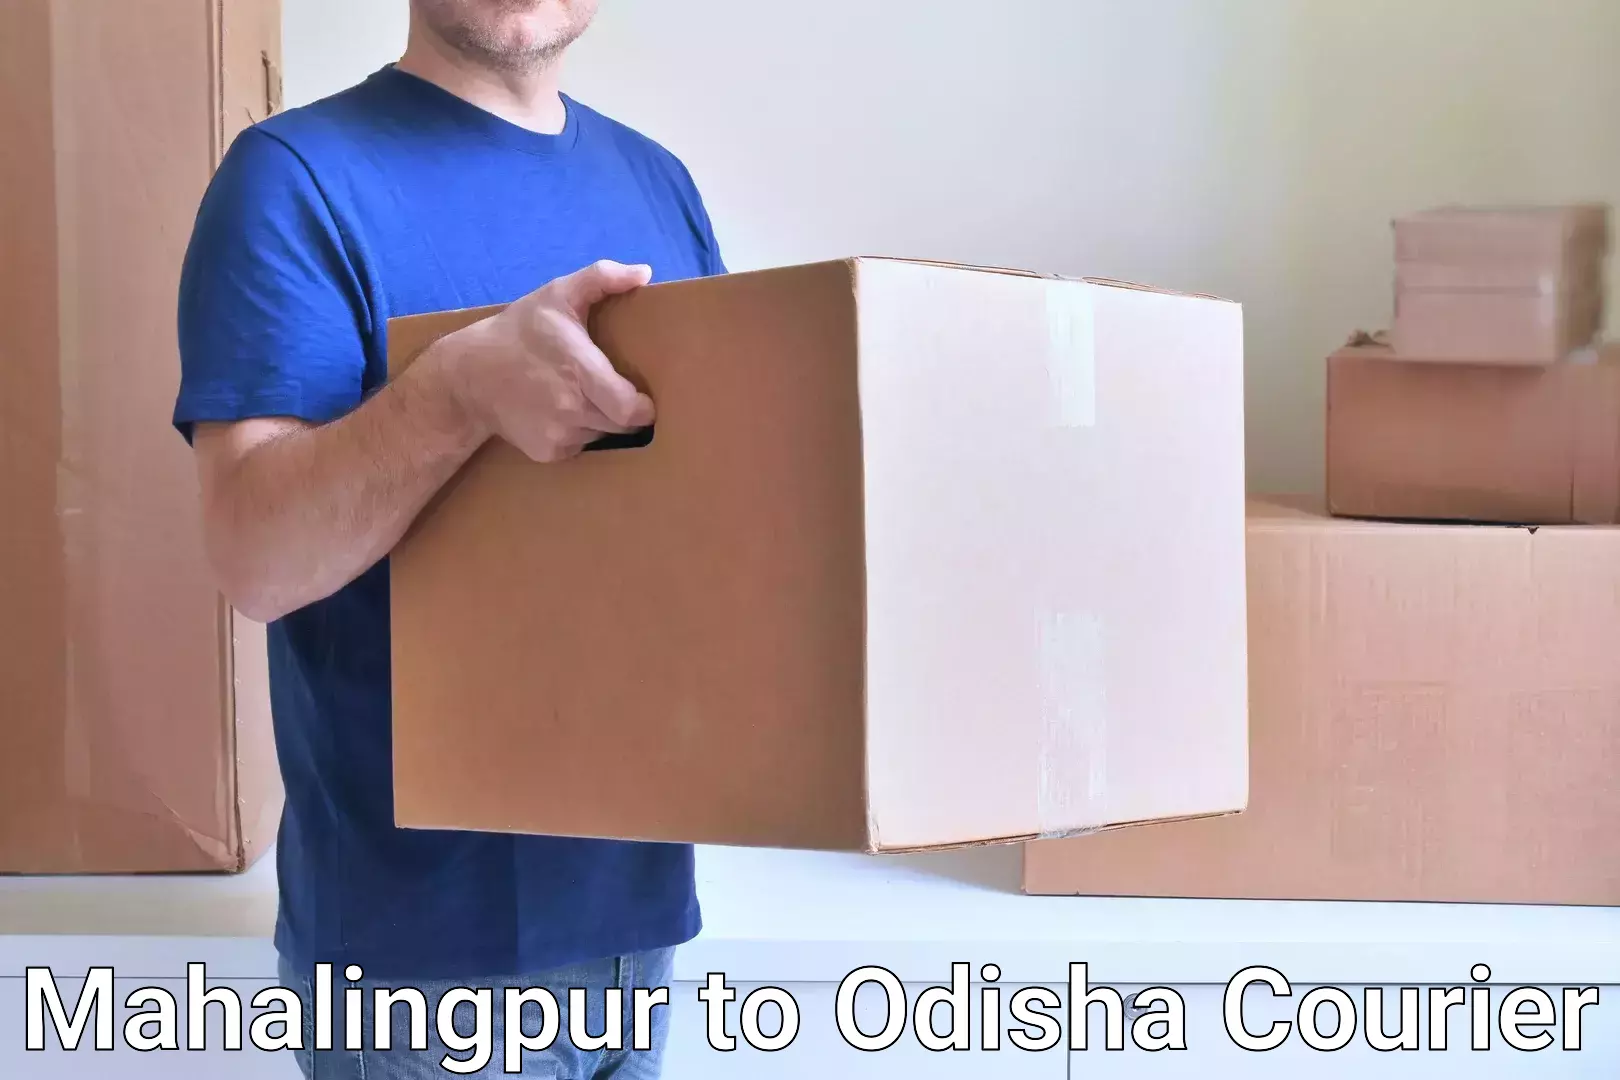 On-call courier service Mahalingpur to Adaspur